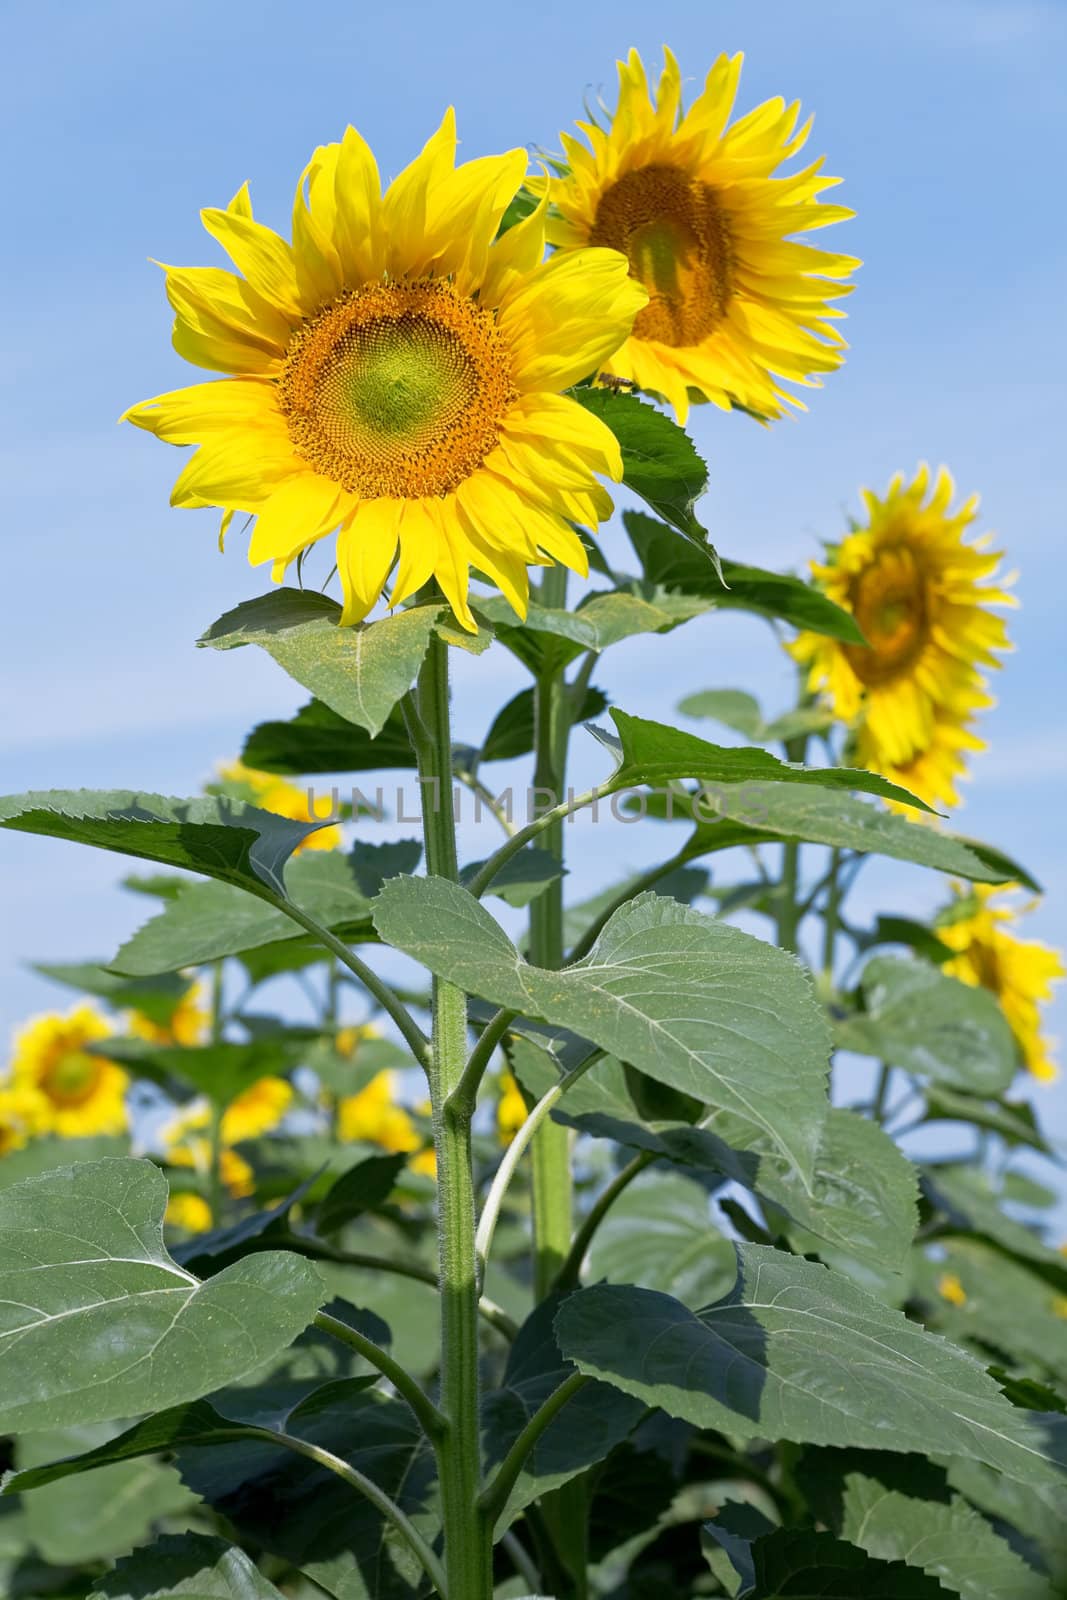 yellow sunflowers against a blue clear sky by Serp